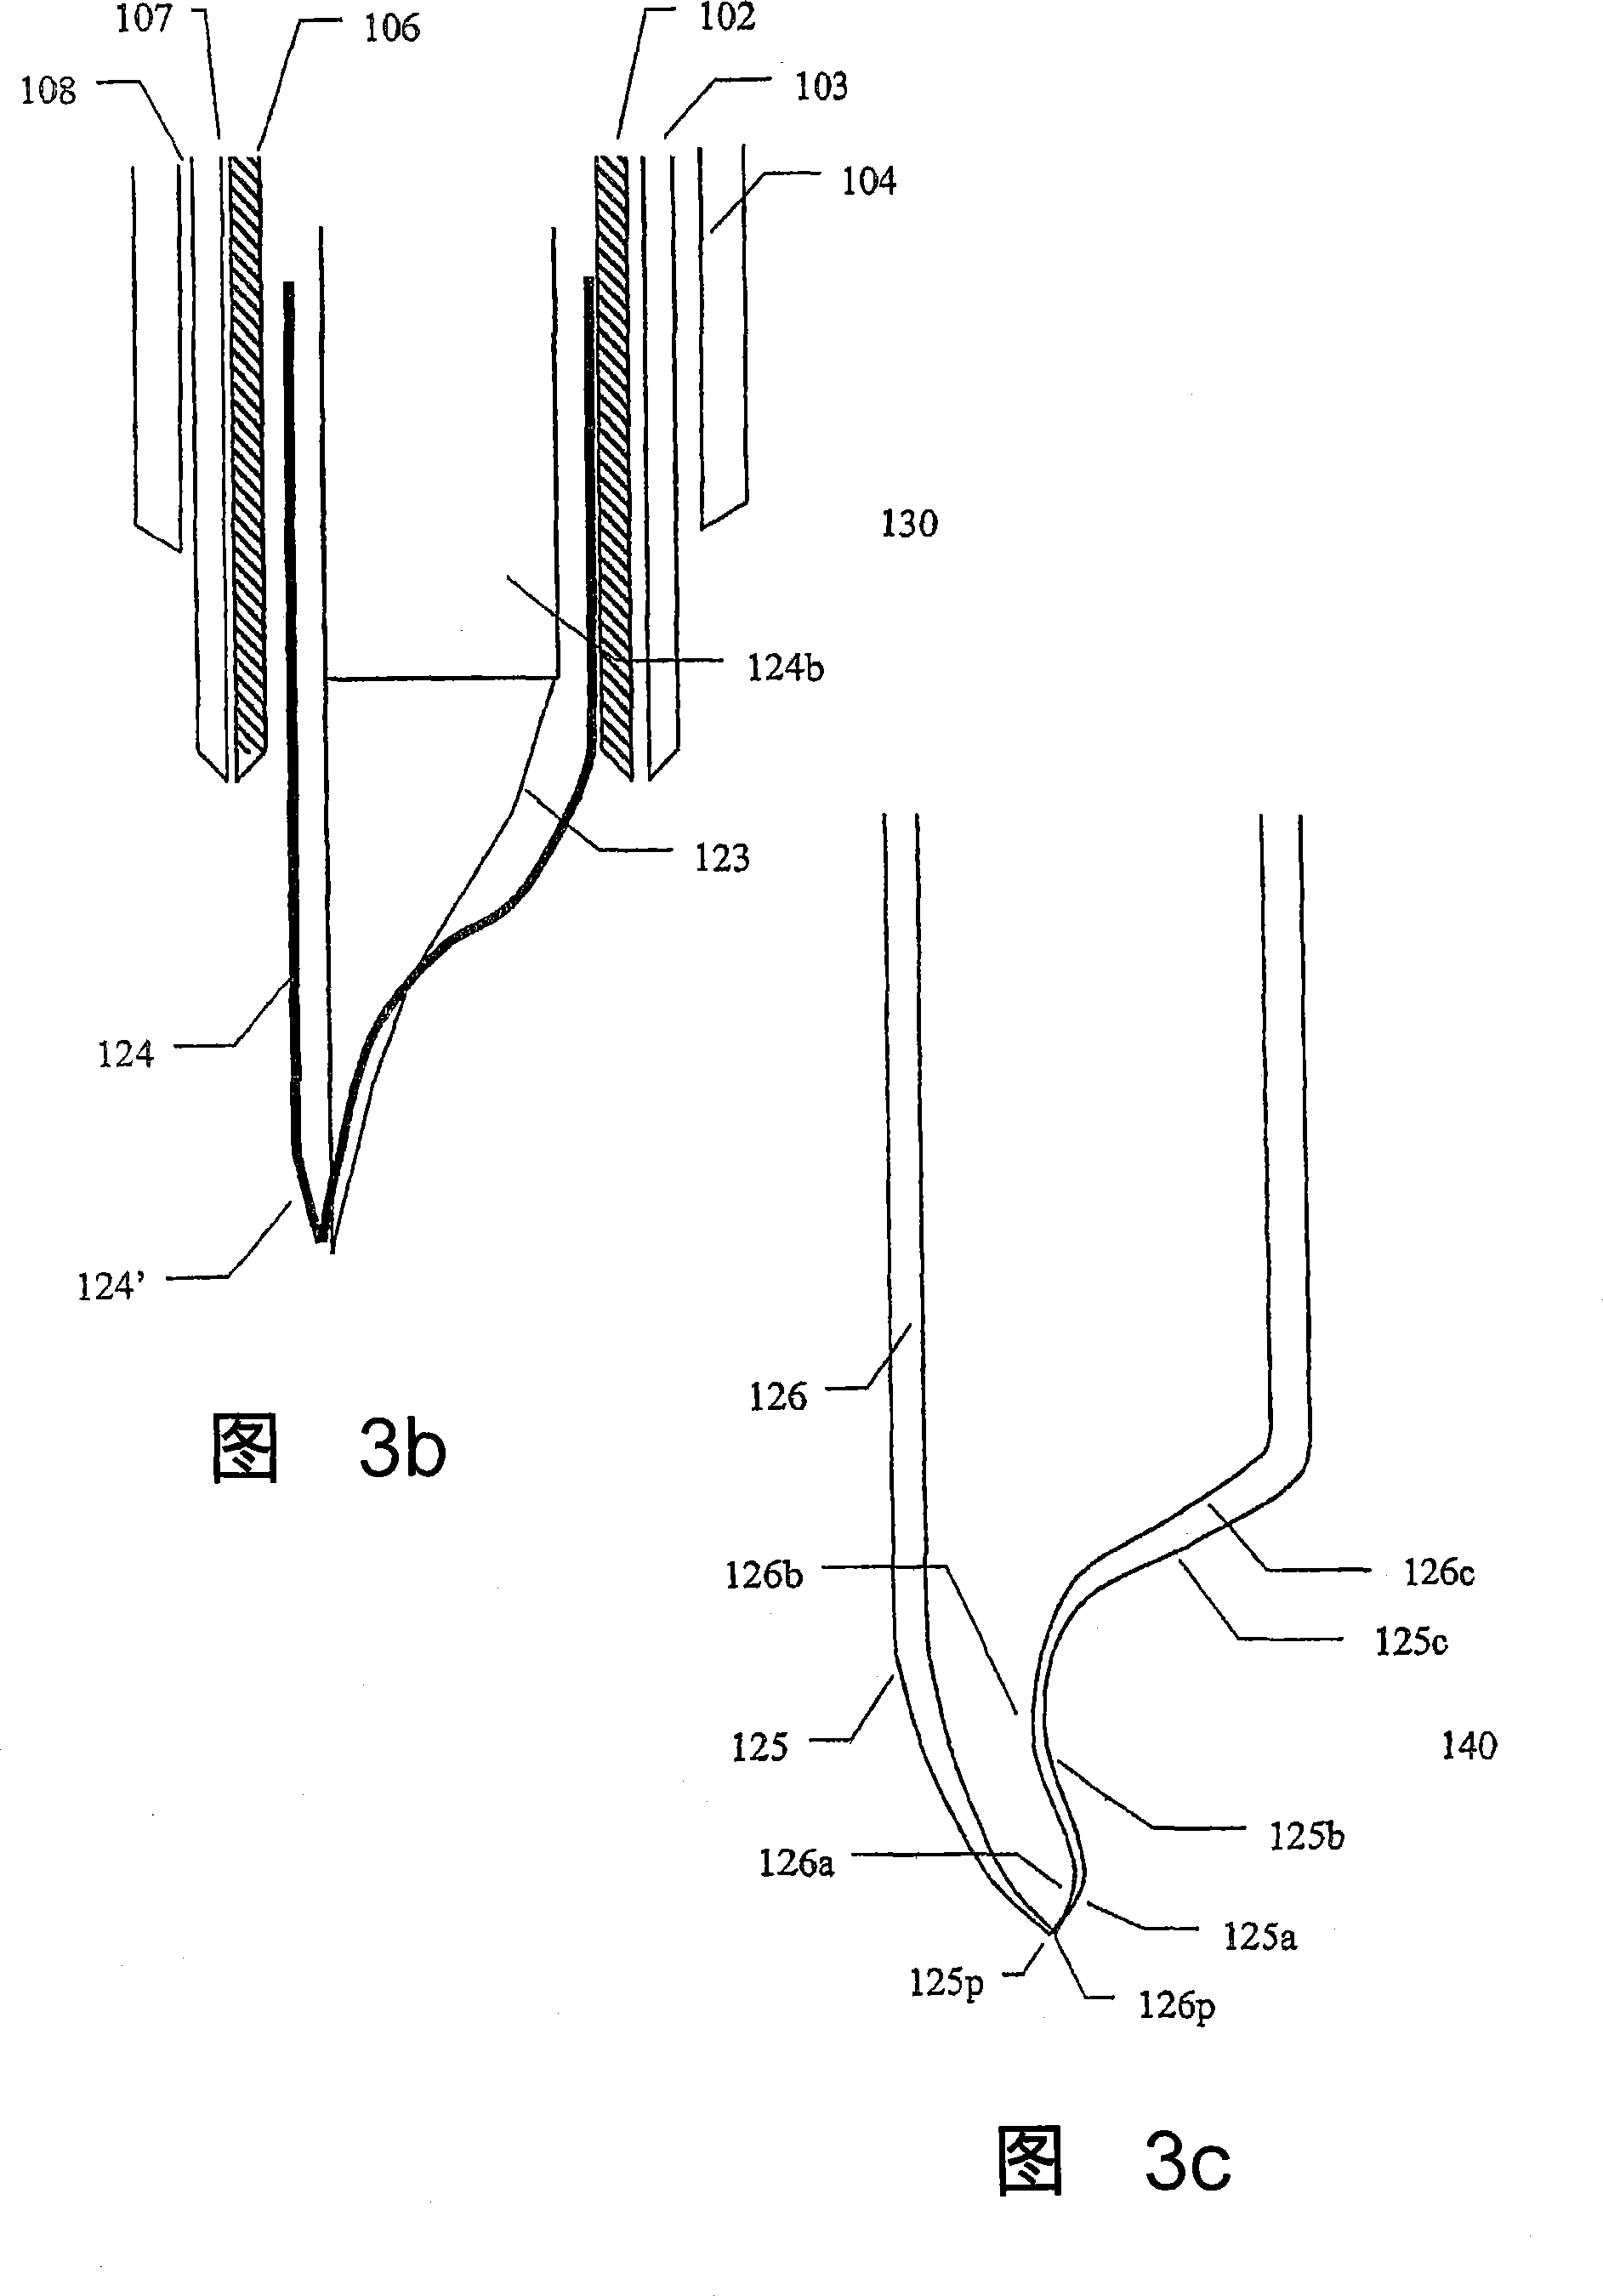 Energy assisted medical devices, systems and methods